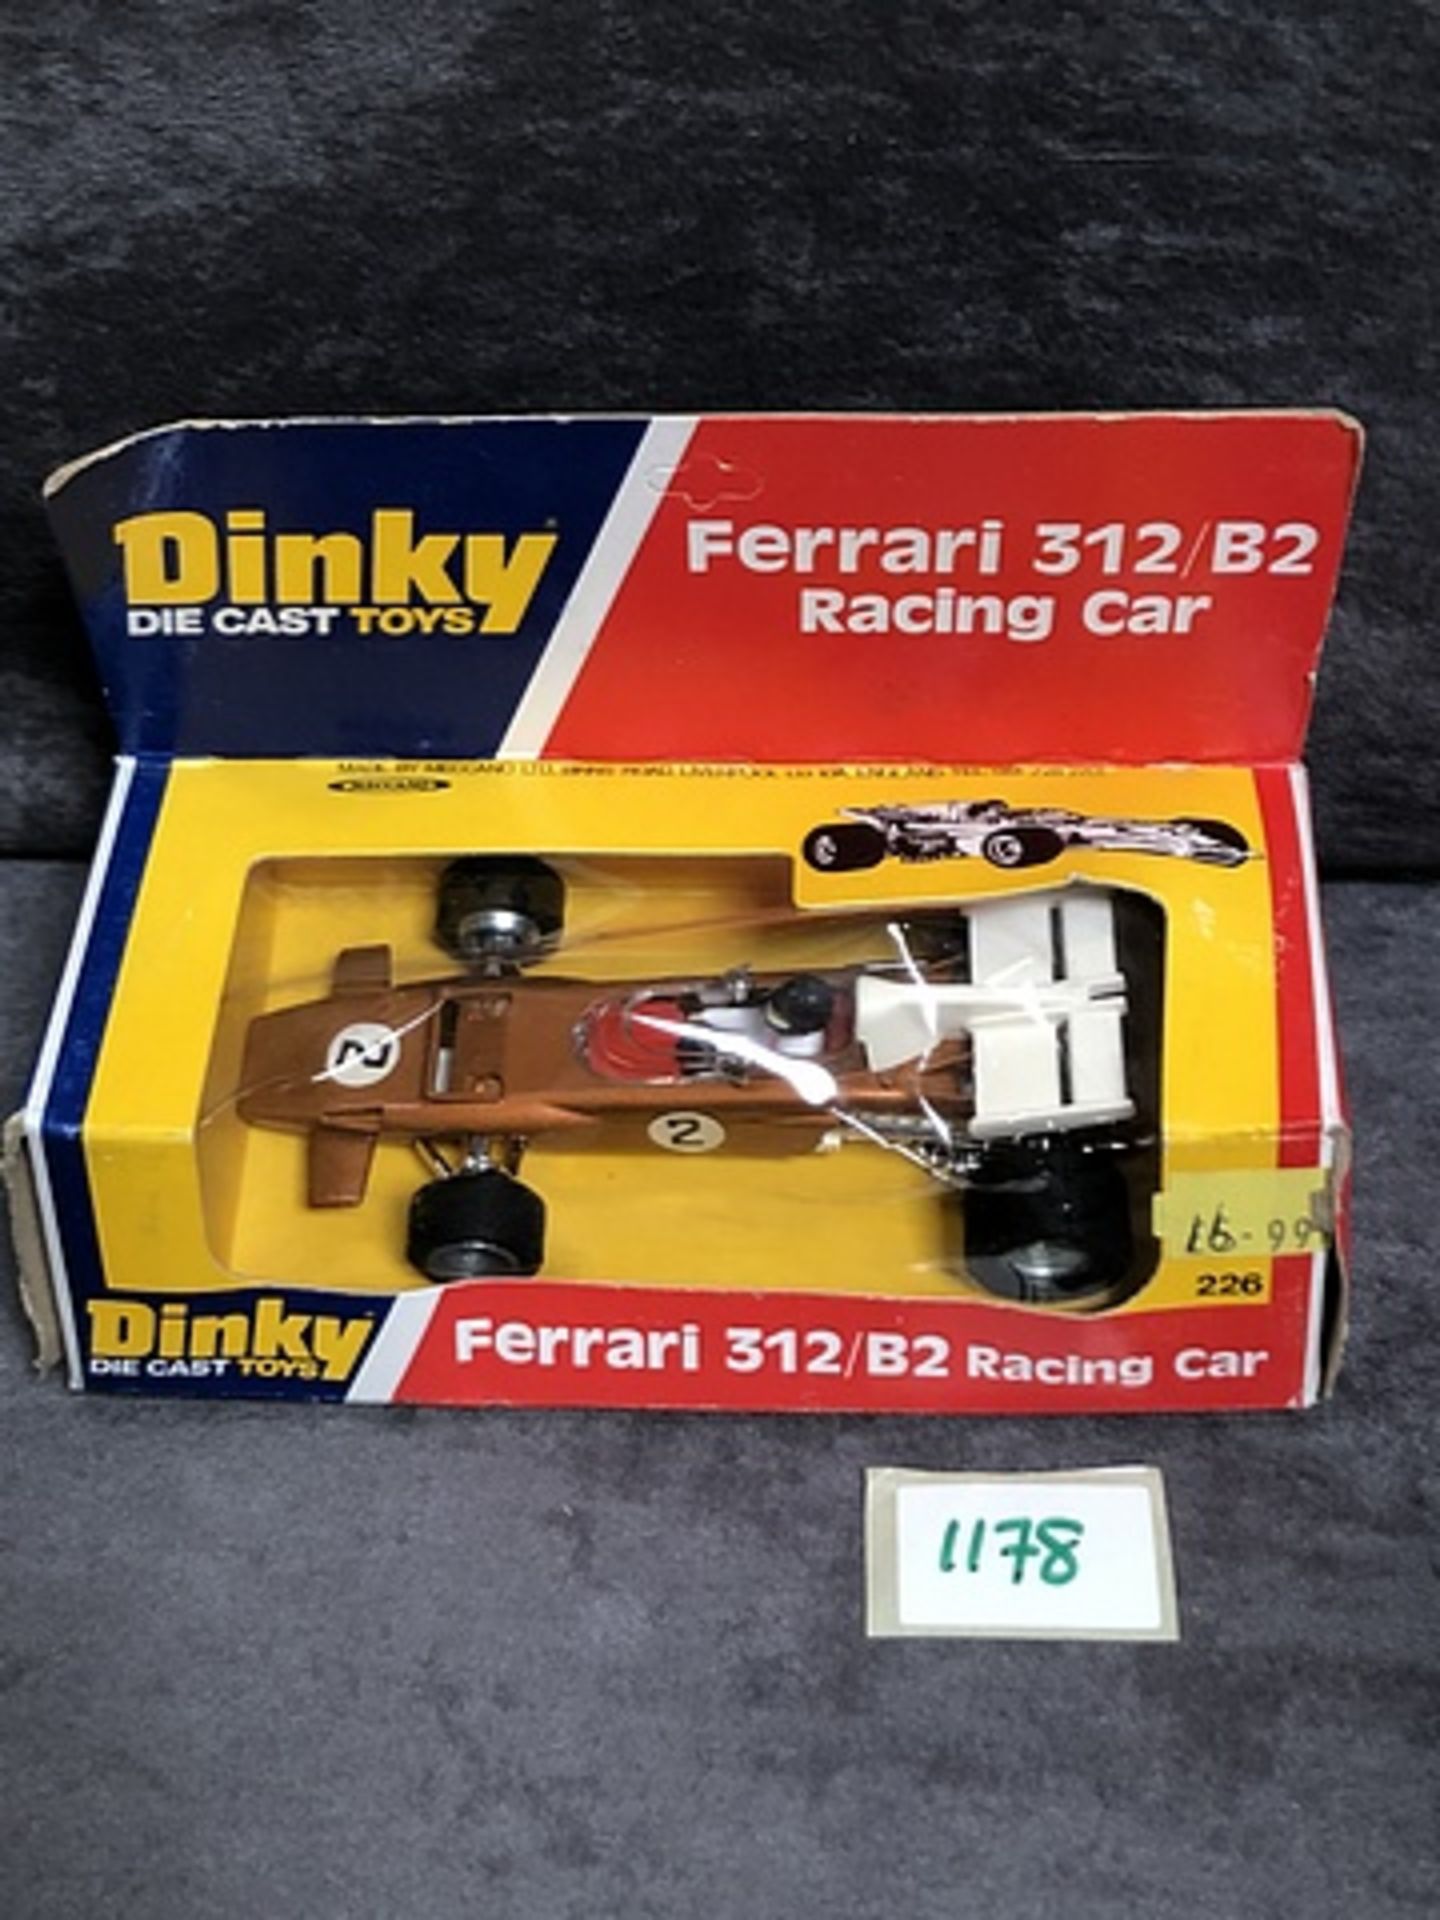 Dinky Toys Diecast #226 Ferrari 312/B2 Racing Car Model is in Mint condition in a box - Image 2 of 2